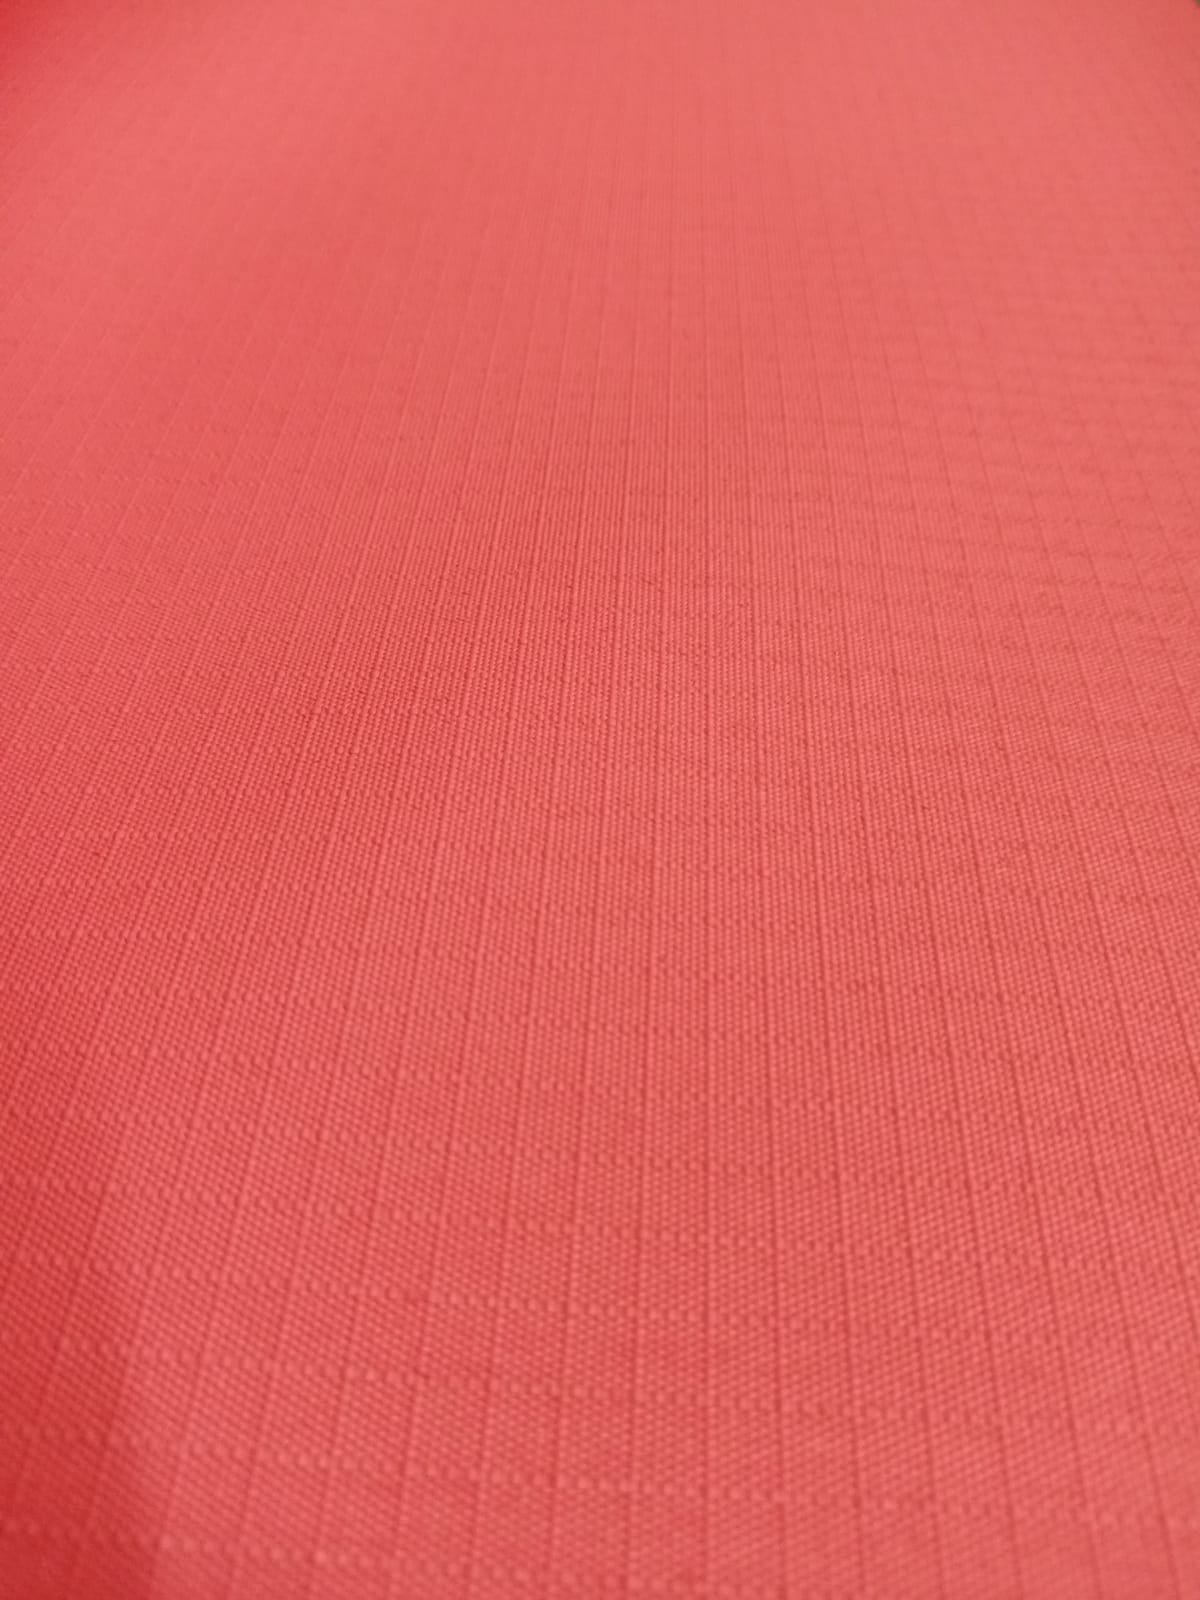 Ripstop Canvas Material - Red